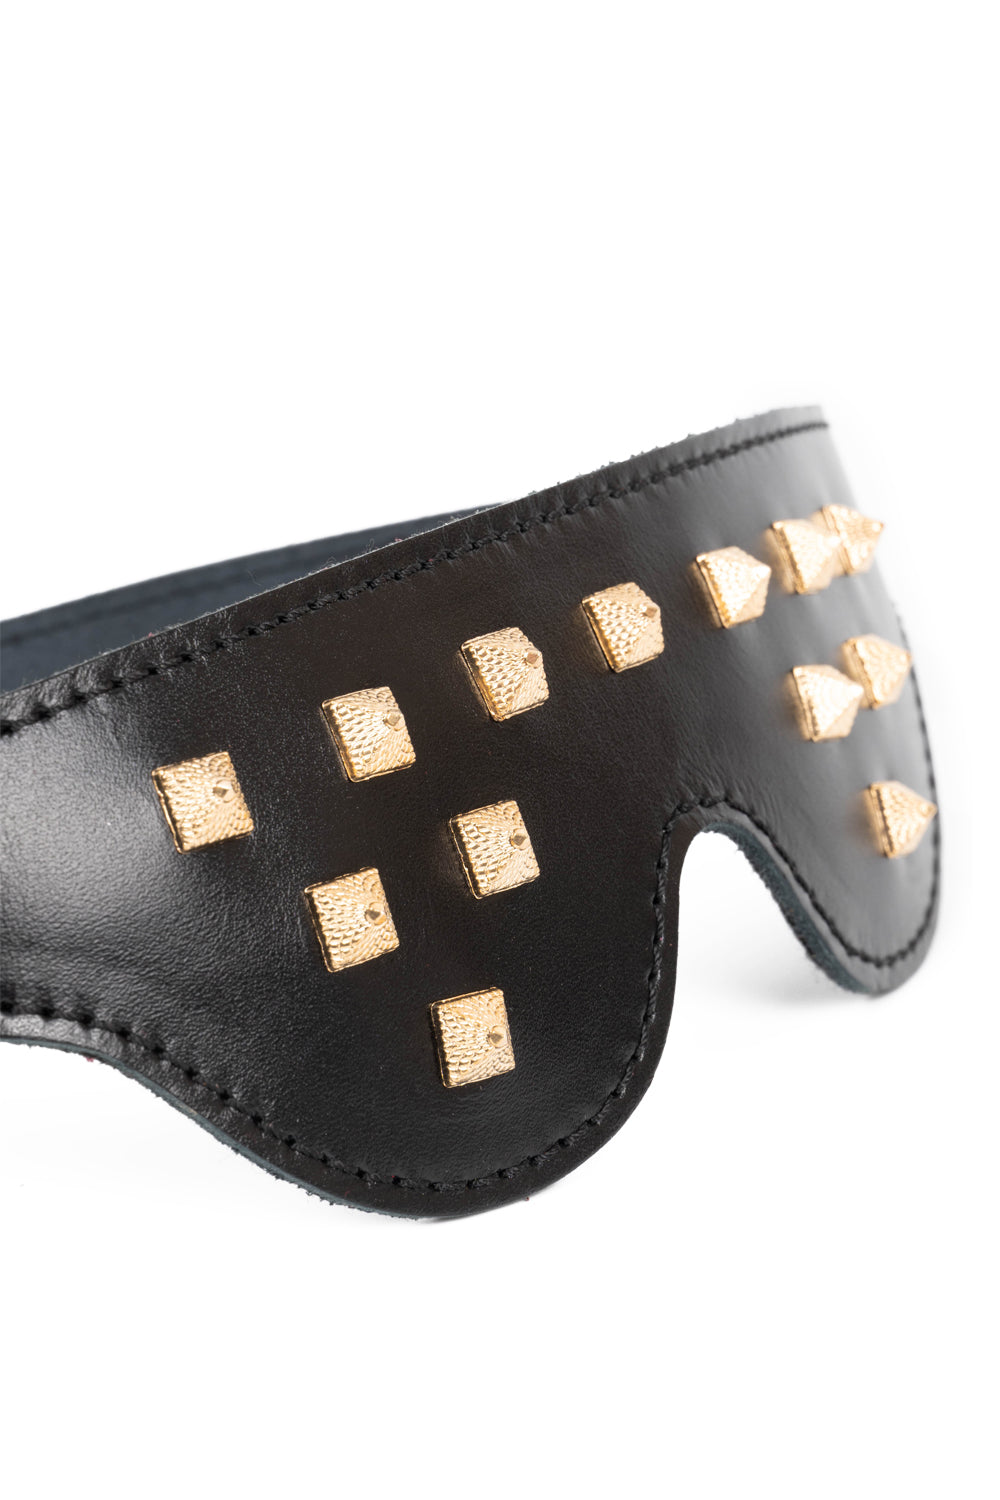 Leather Blindfold Mask with spikers. Black